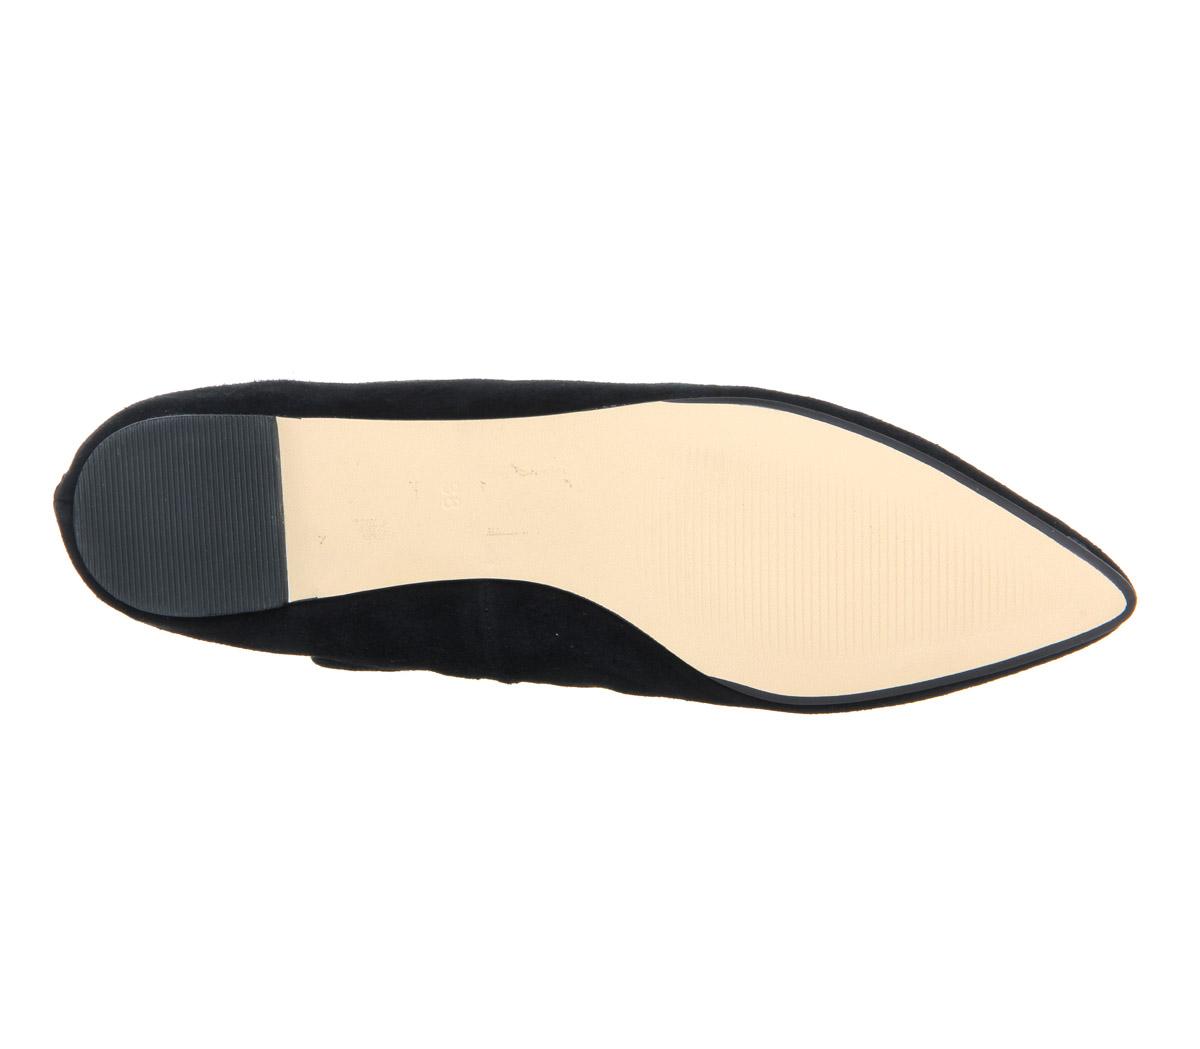 Office Vibrant Lace Up Flats New Black Suede - Flats